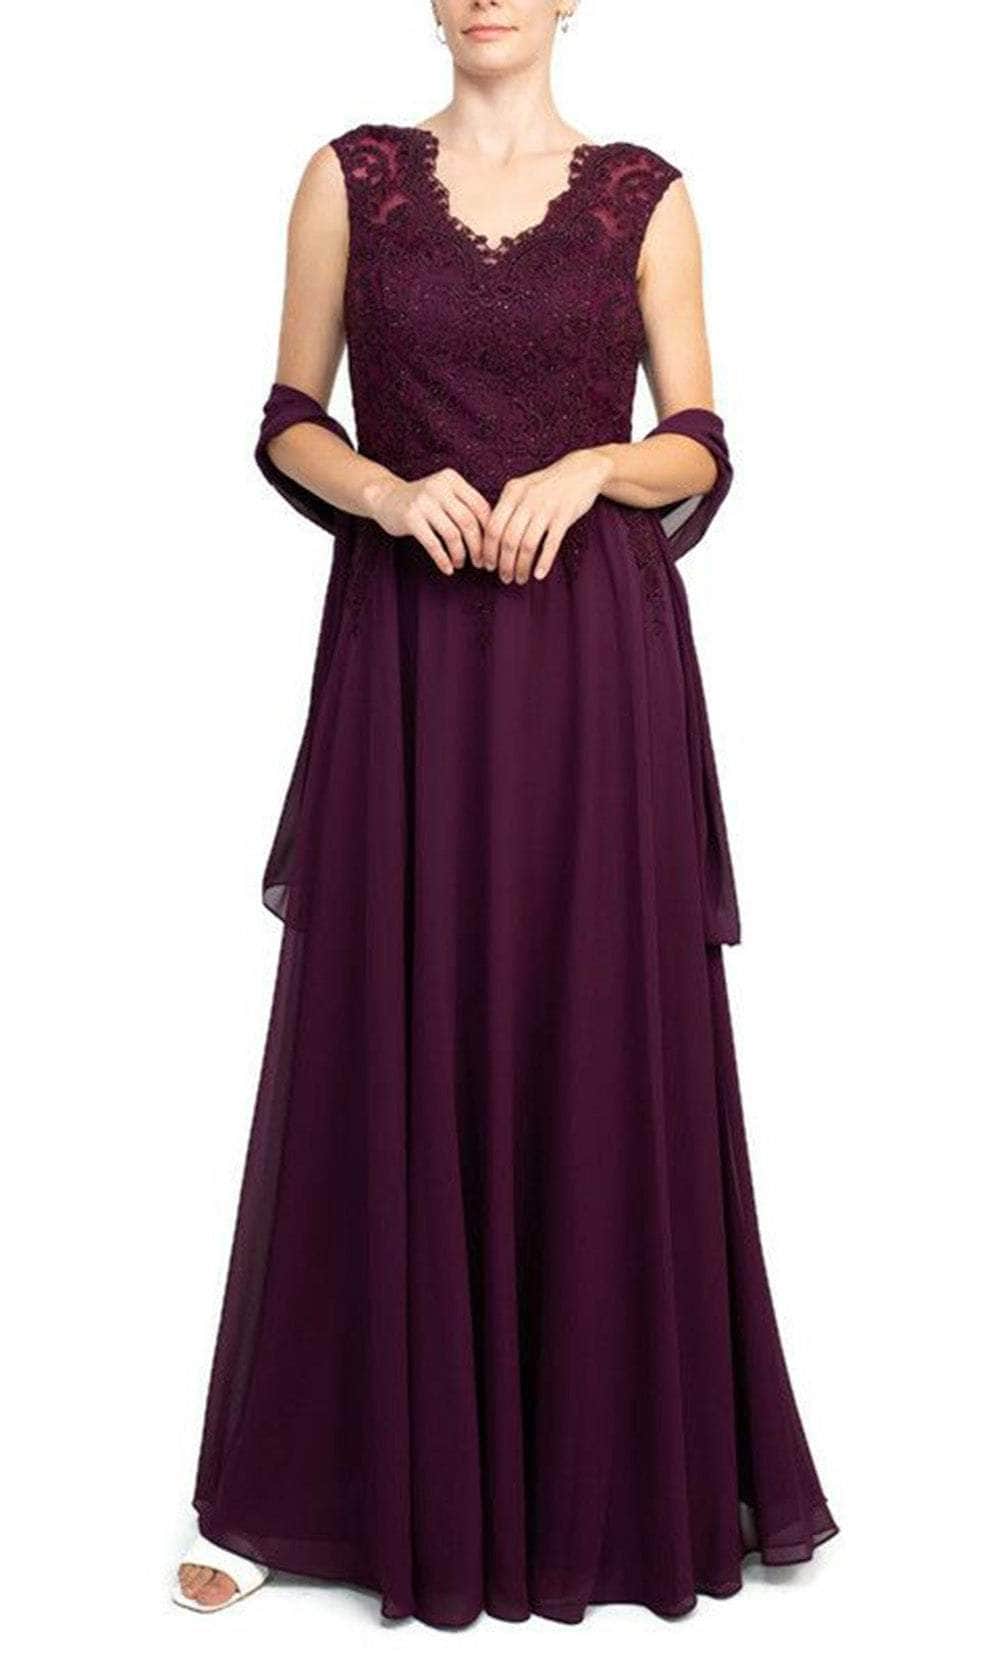 Cachet 60178 - Embroidered Cap Sleeve A-line Dress Special Occasion Dress 6 / Wine